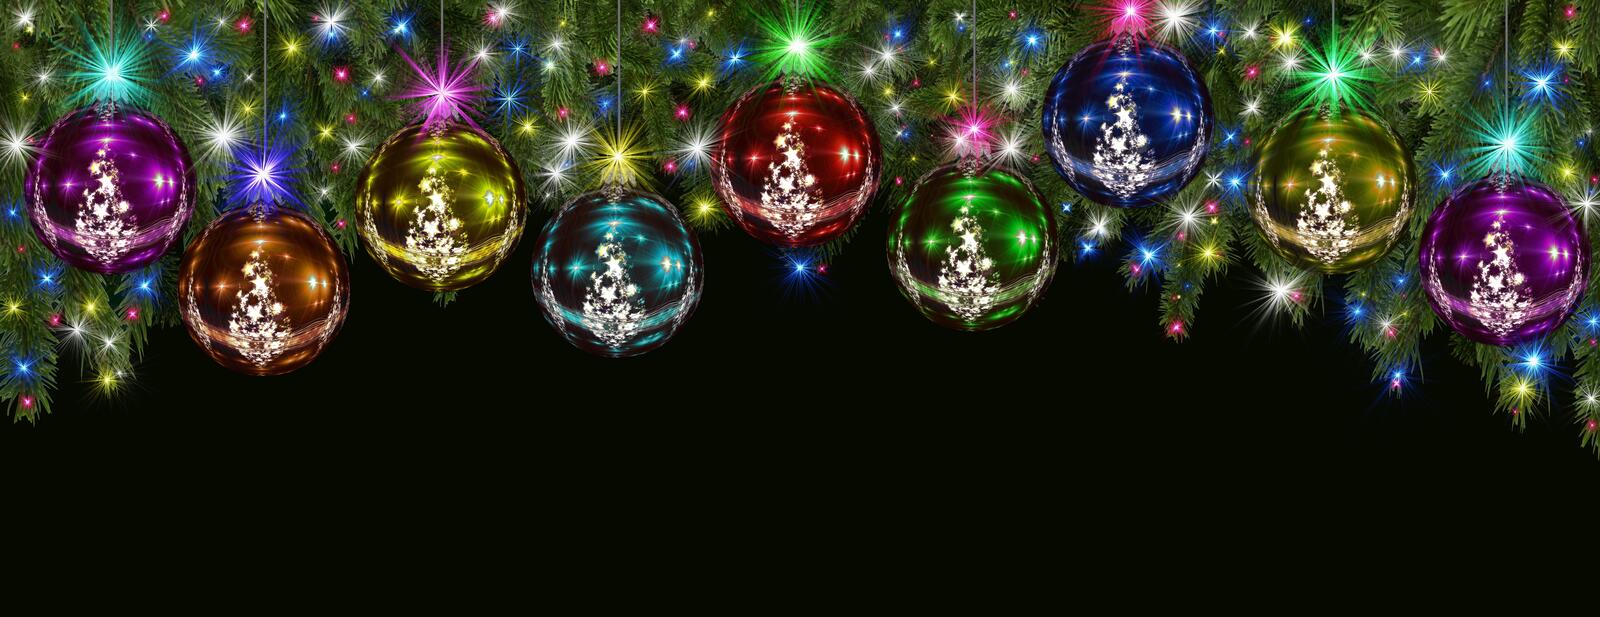 Wallpapers decoration Christmas Wallpaper new year on the desktop